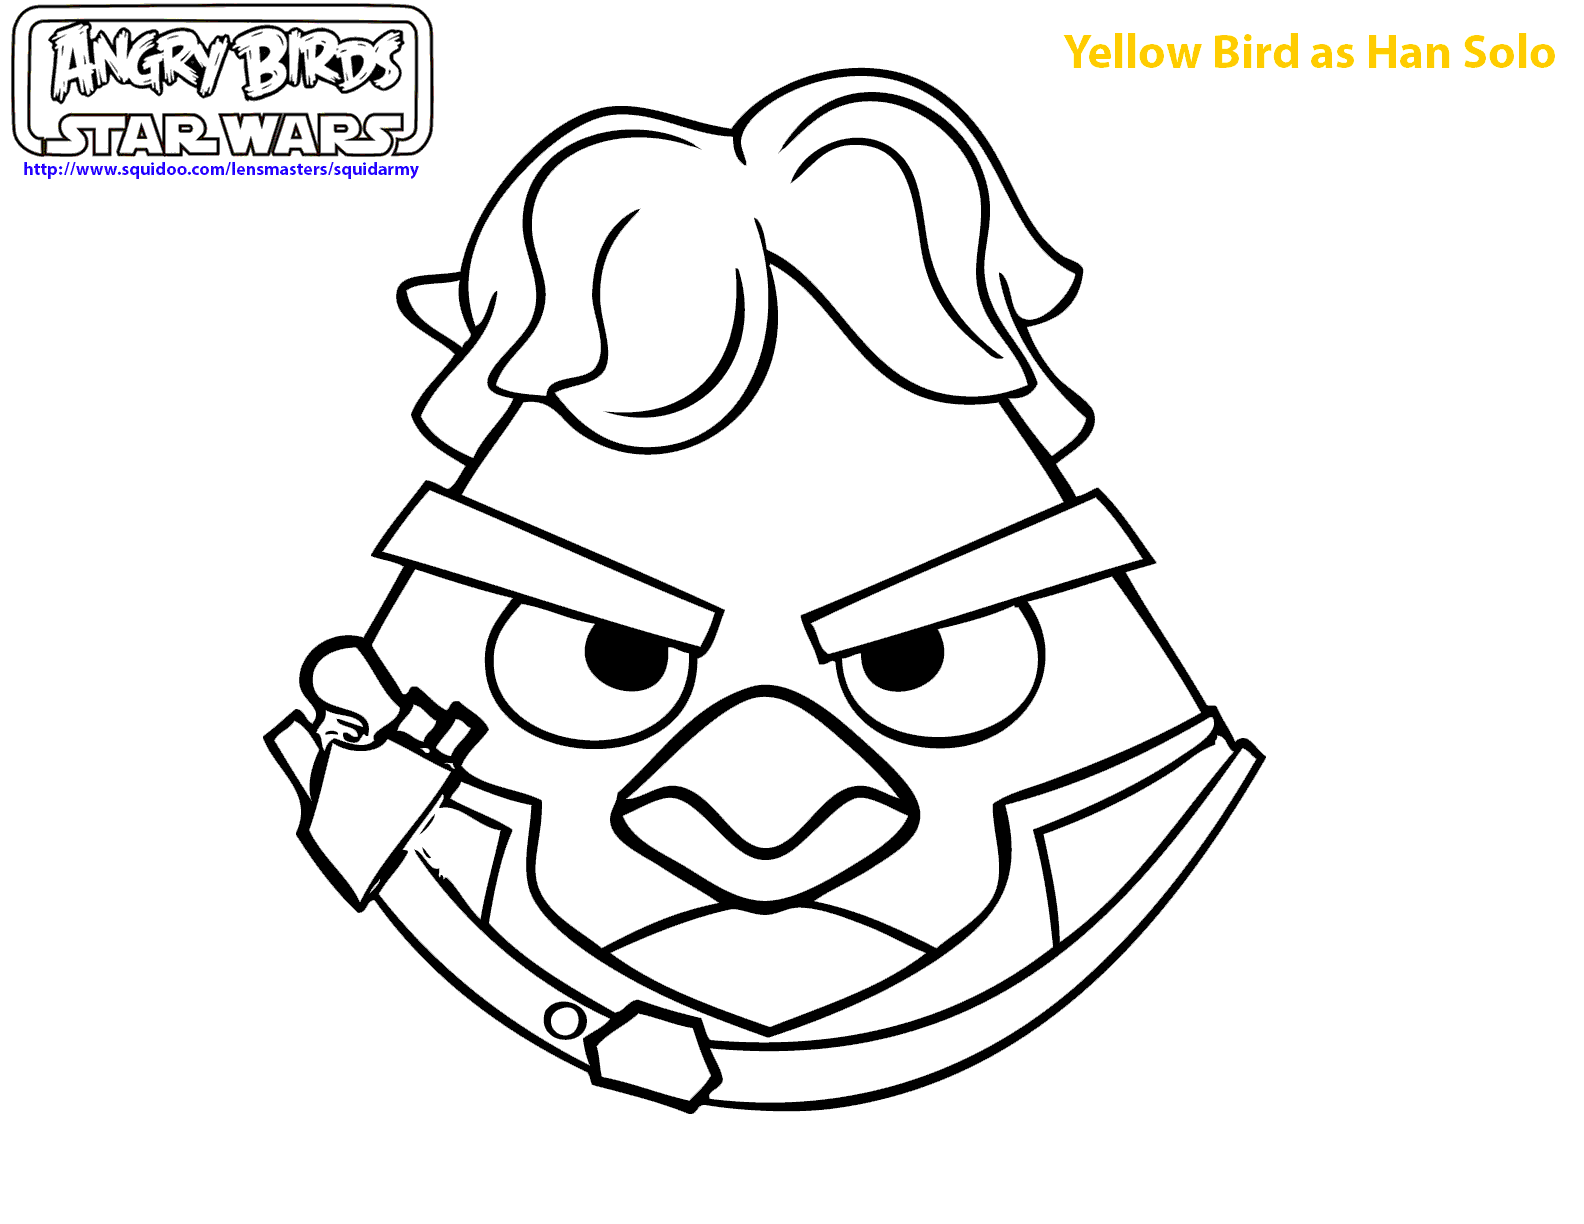 angry-birds-star-wars-coloring-pages-ii-squid-army